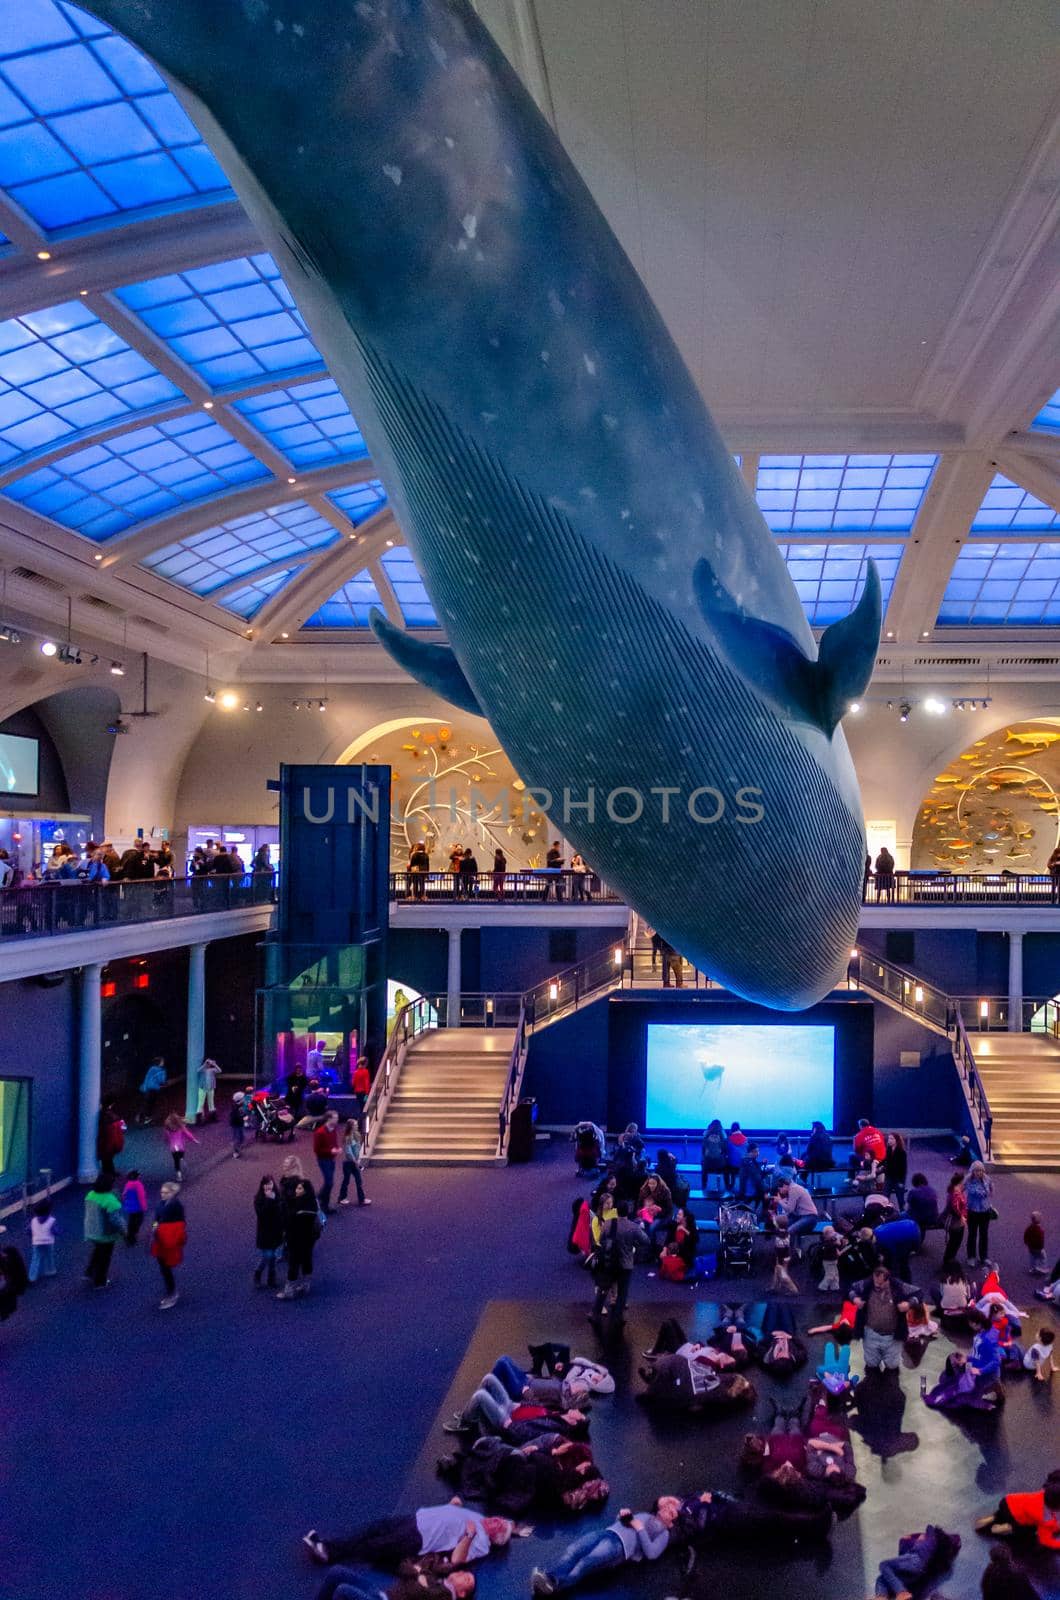 Blue Whale at Museum of Natural History, New York City with lots of People lying down underneath on the ground inside the Building, vertical